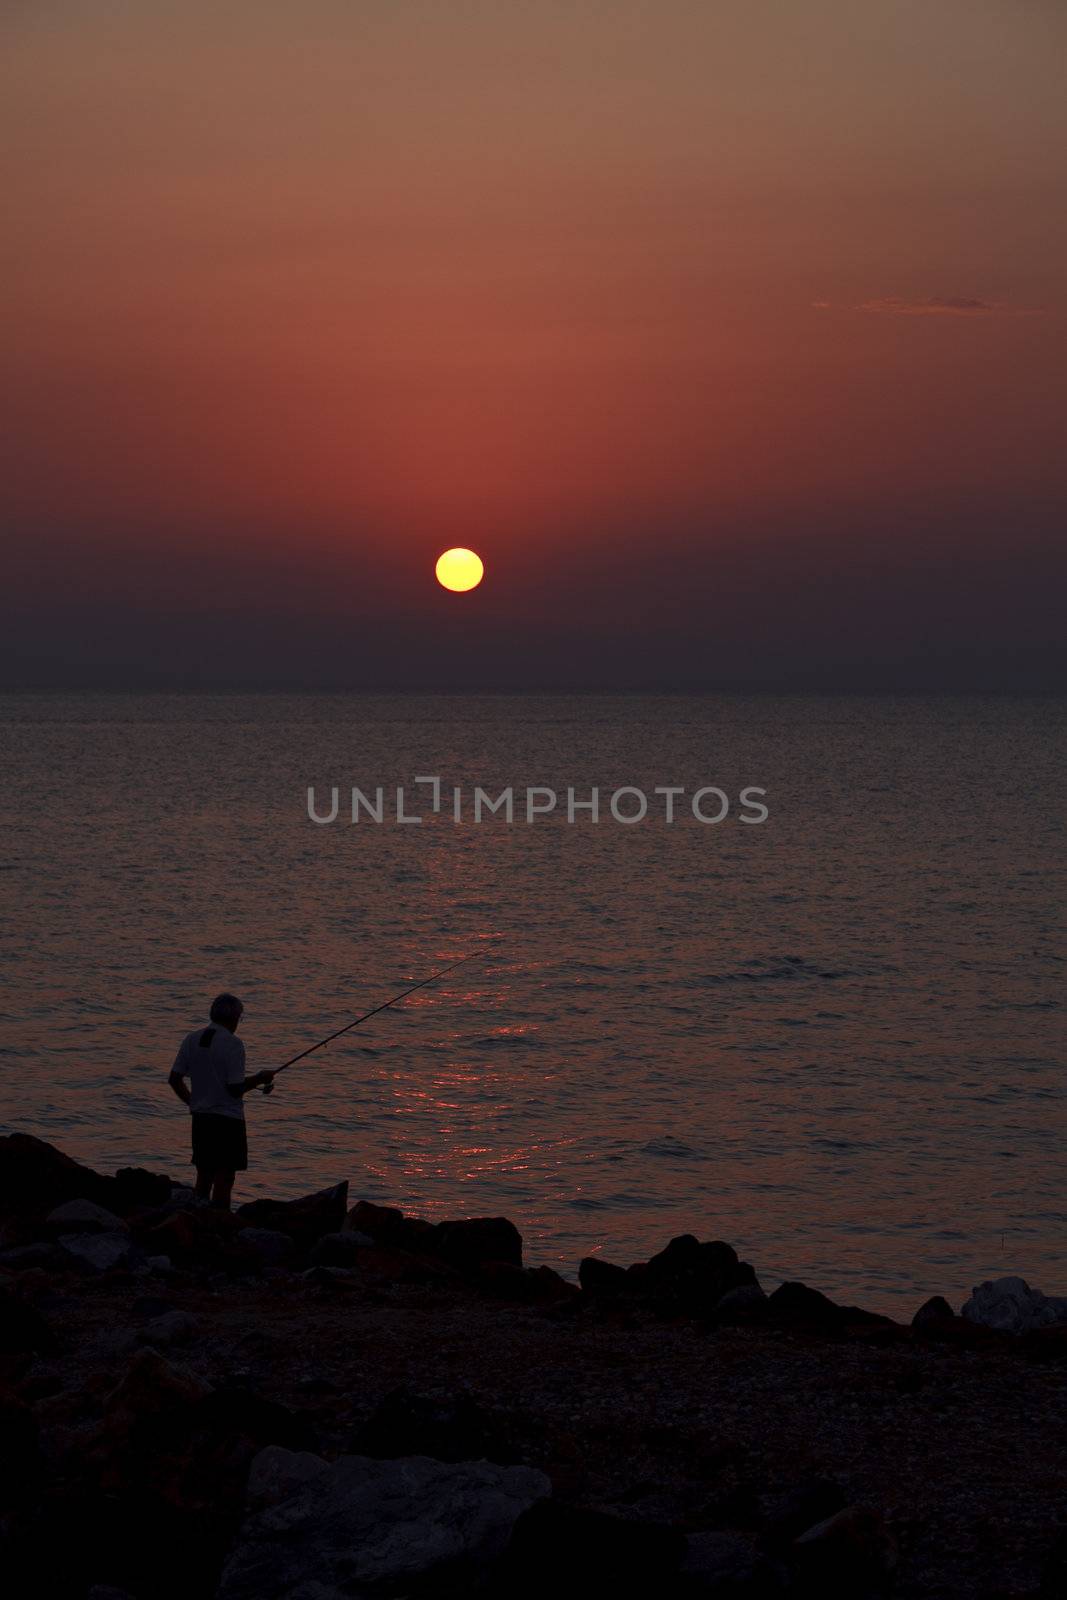 photo taken at the Greek sunset that show manner and type of feeding habits of the people